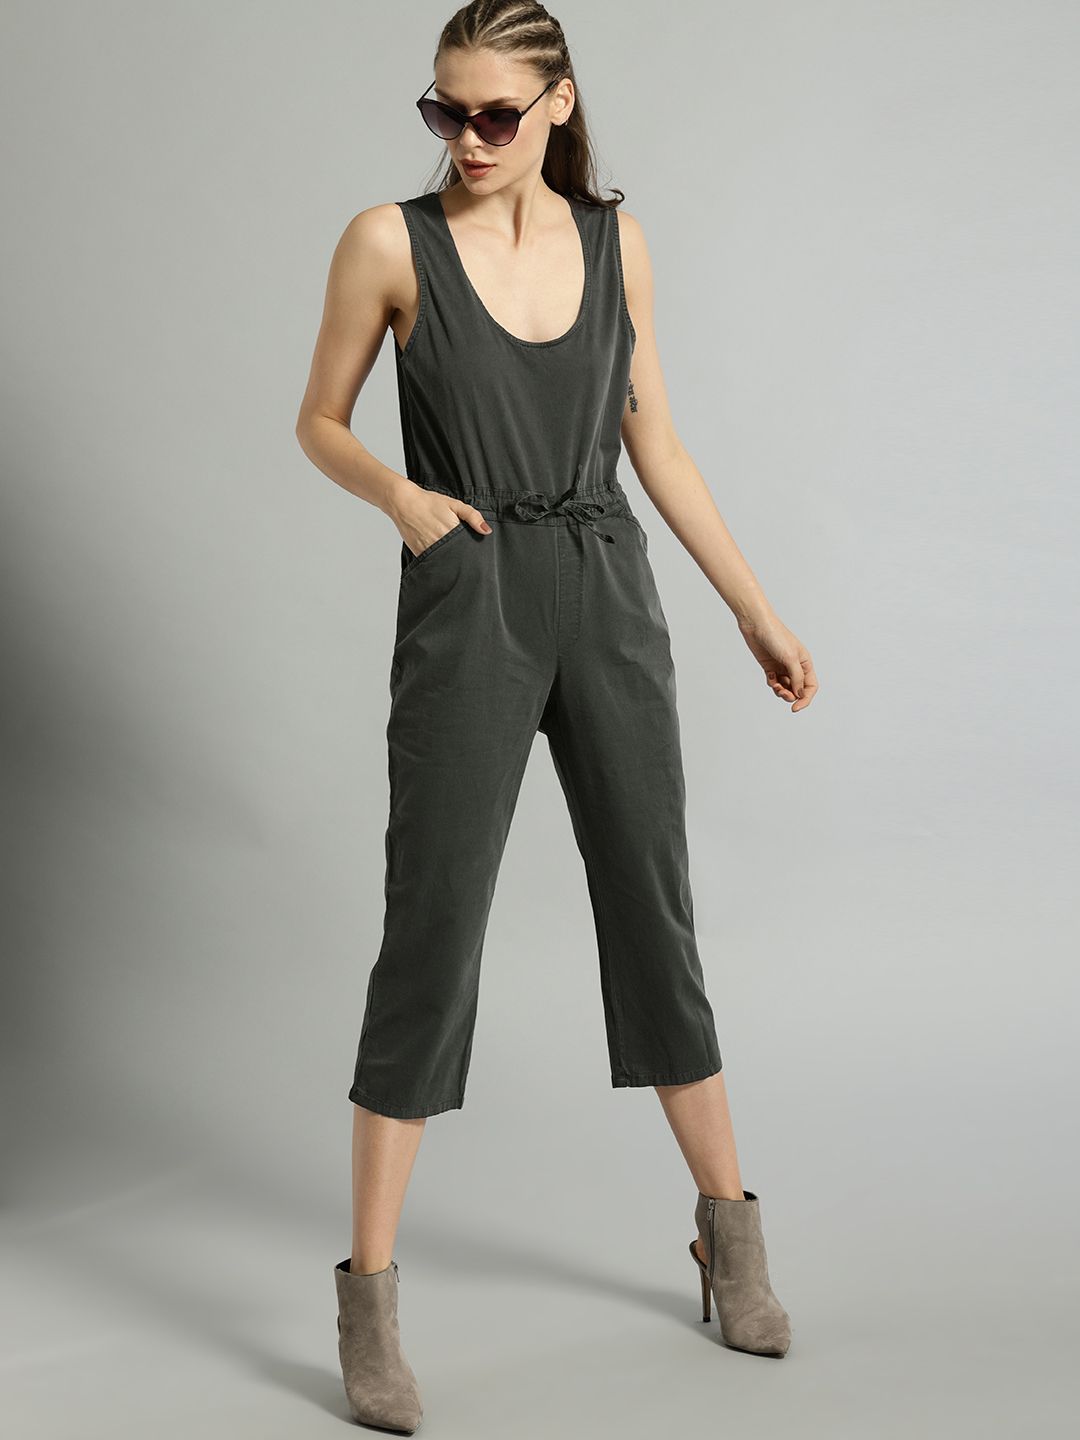 Roadster Grey Solid Culotte Jumpsuit Price in India